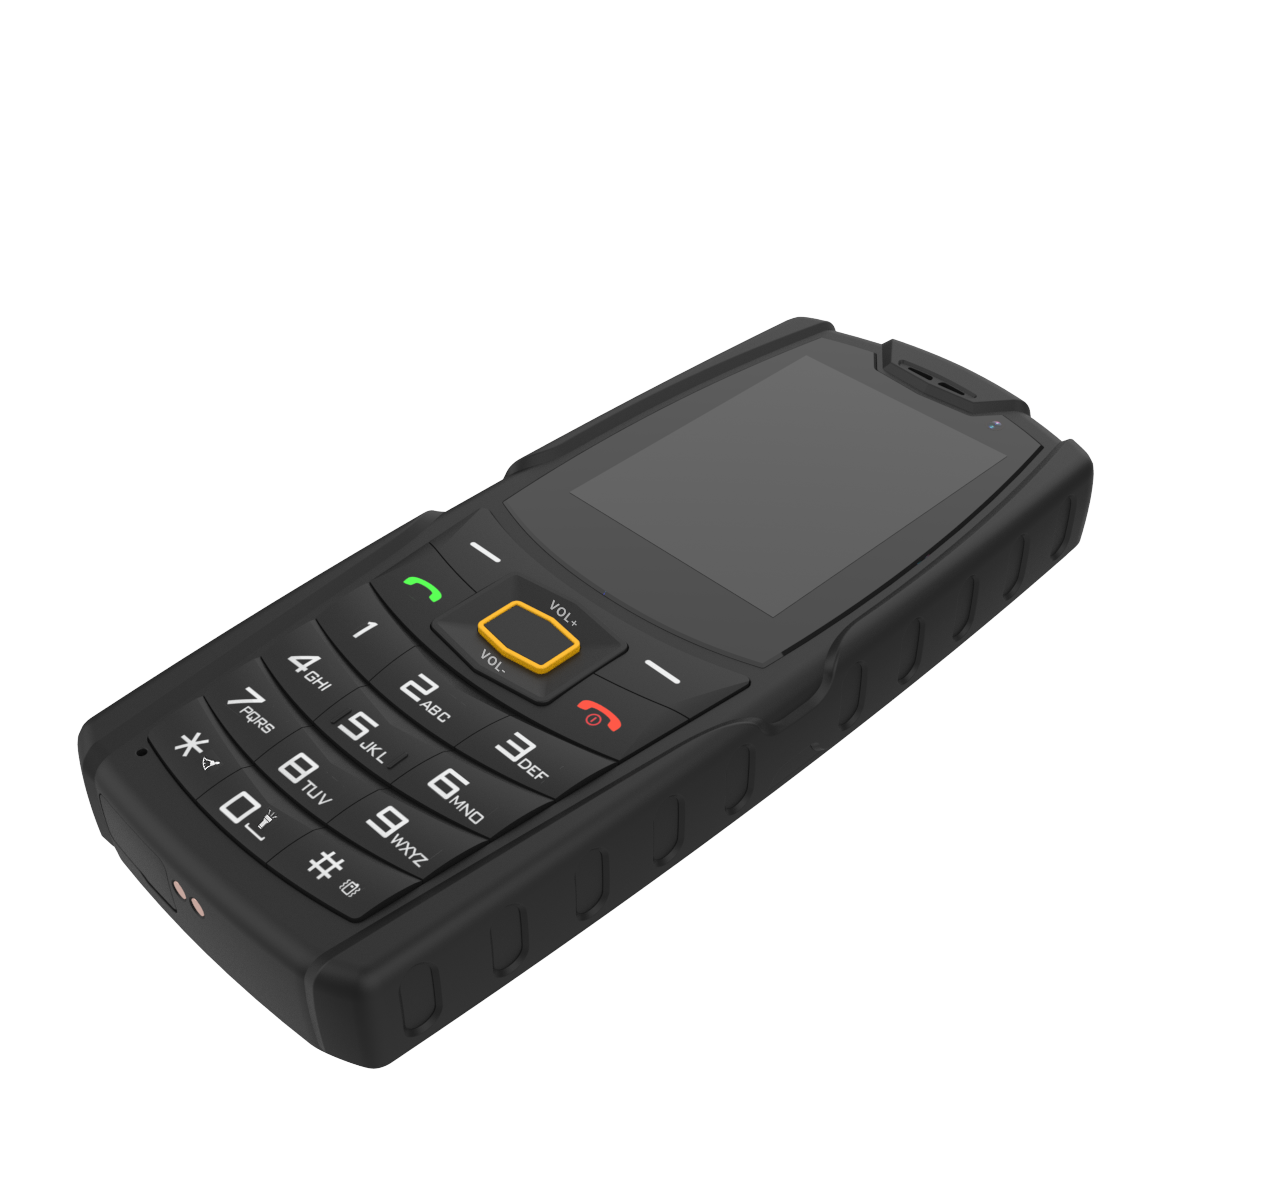 AGM M7 | Android Keyboard Rugged Phone | Never Miss A Call | Removable Battery | US Warehouse